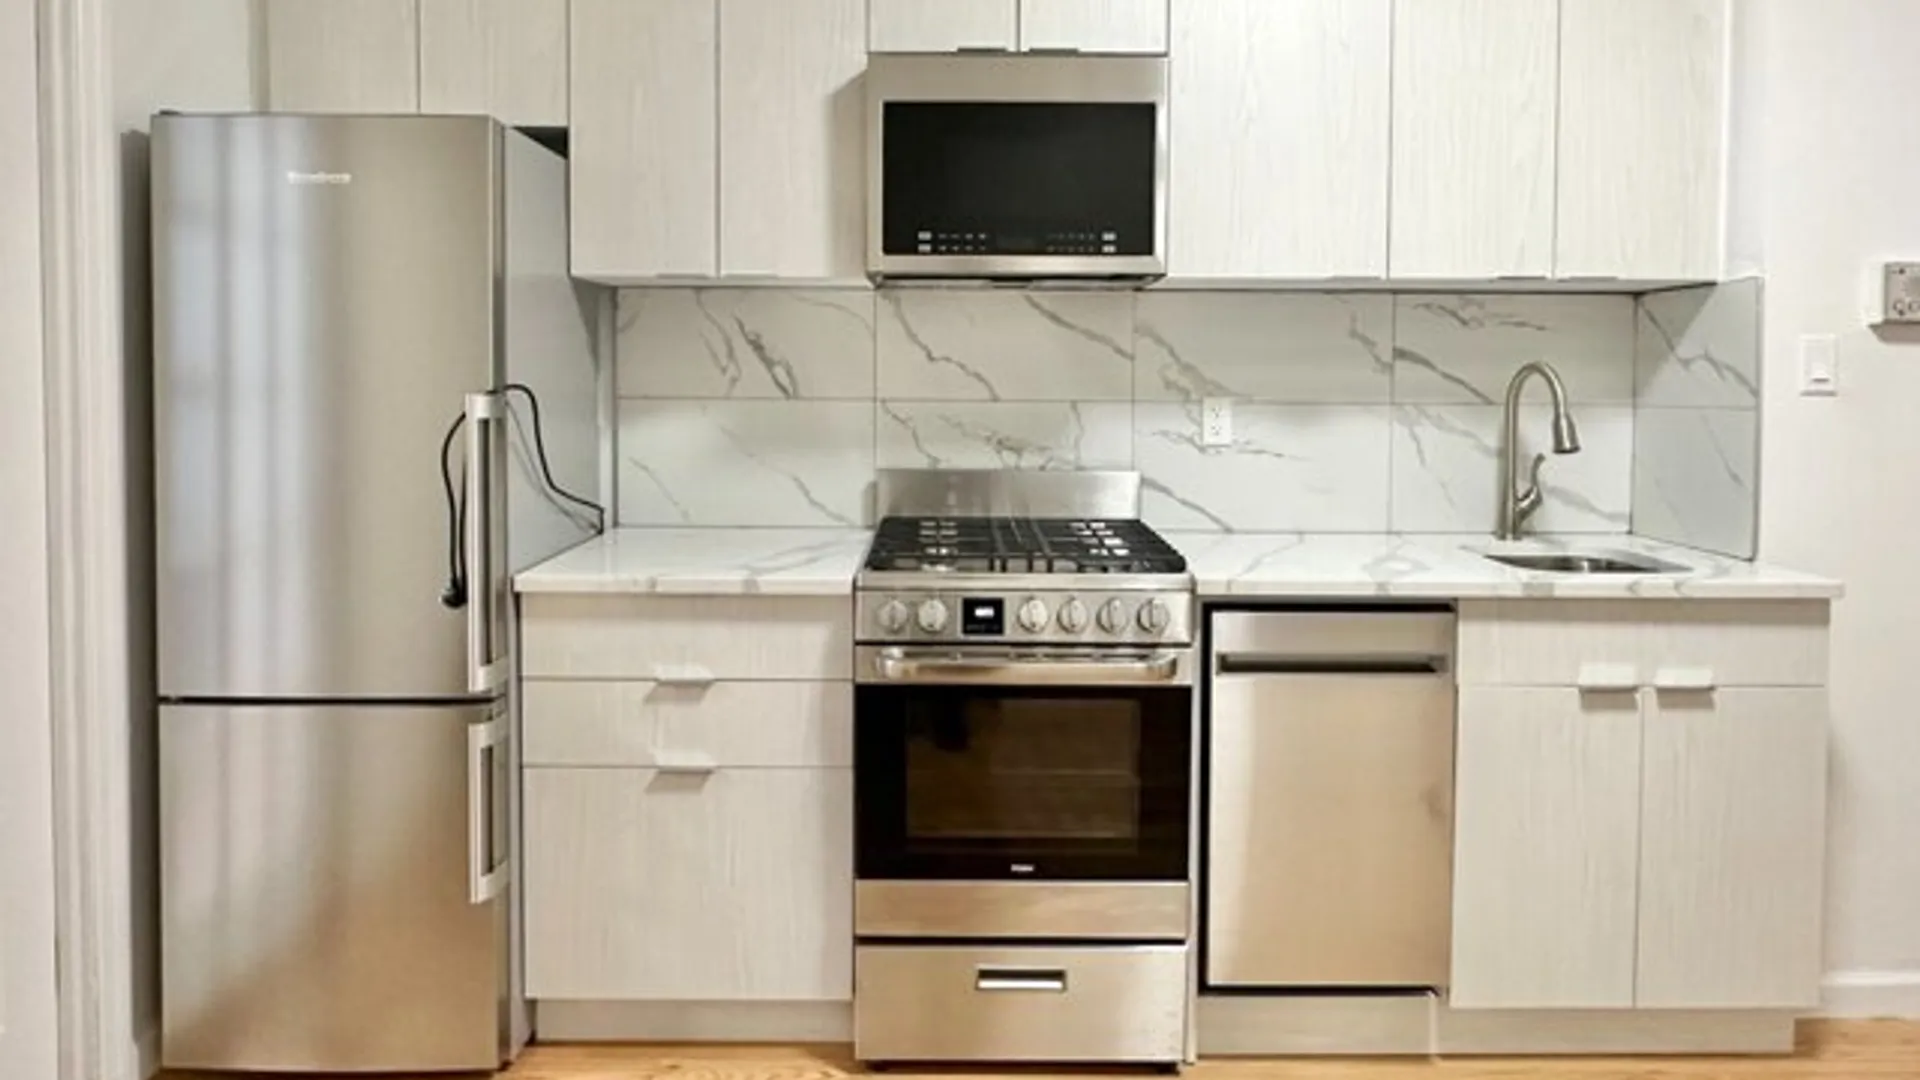 230 Mulberry Street, New York, NY 10012, USA | 1 bed house for rent